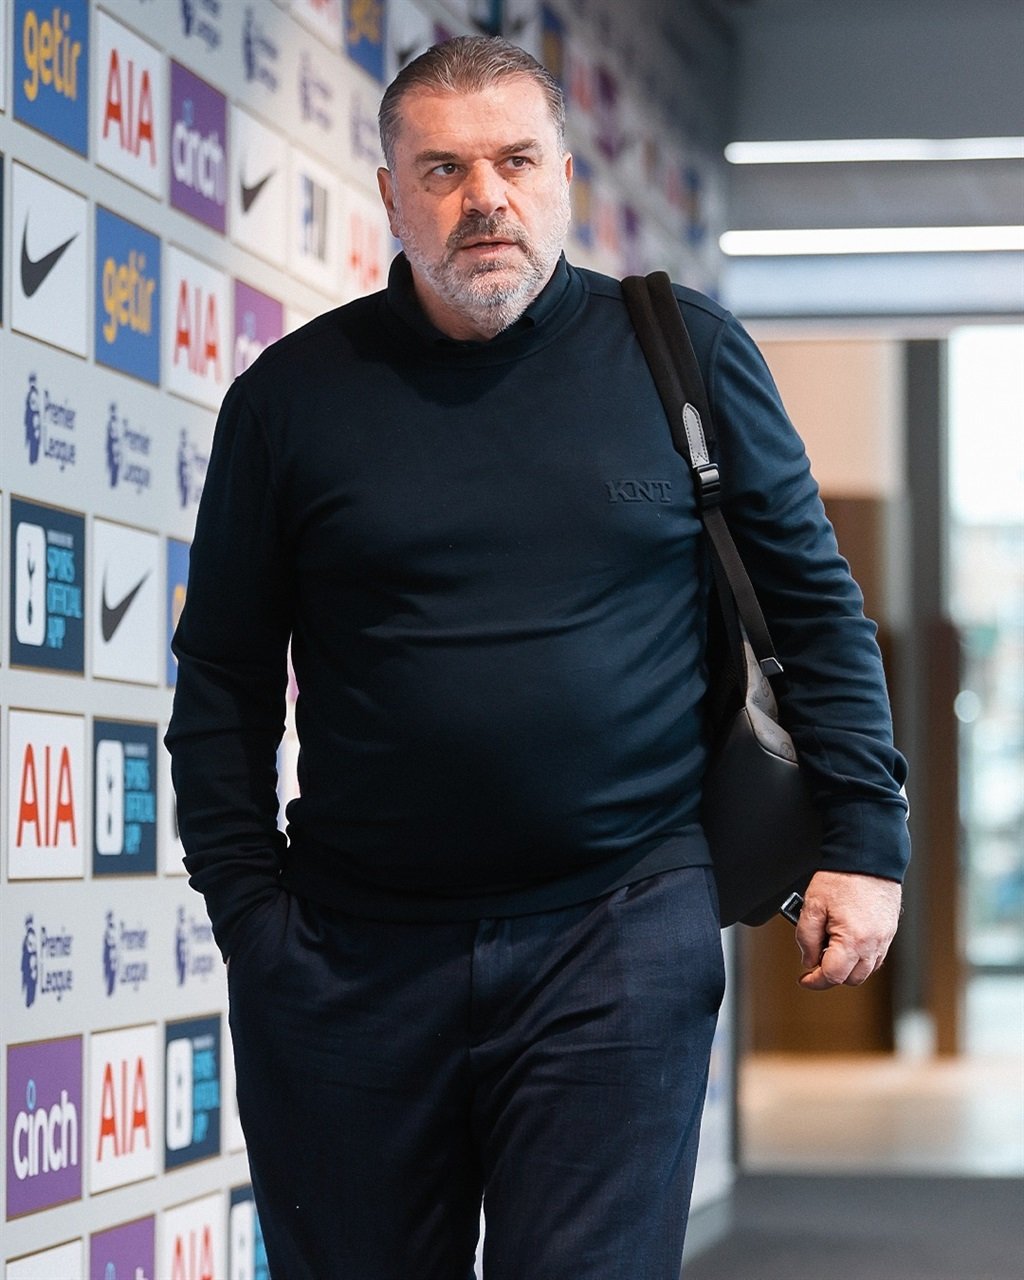 Tottenham Hotspur head coach Ange Postecoglou shared some advice on how Football Manager 2024 gamers should approach their saves.